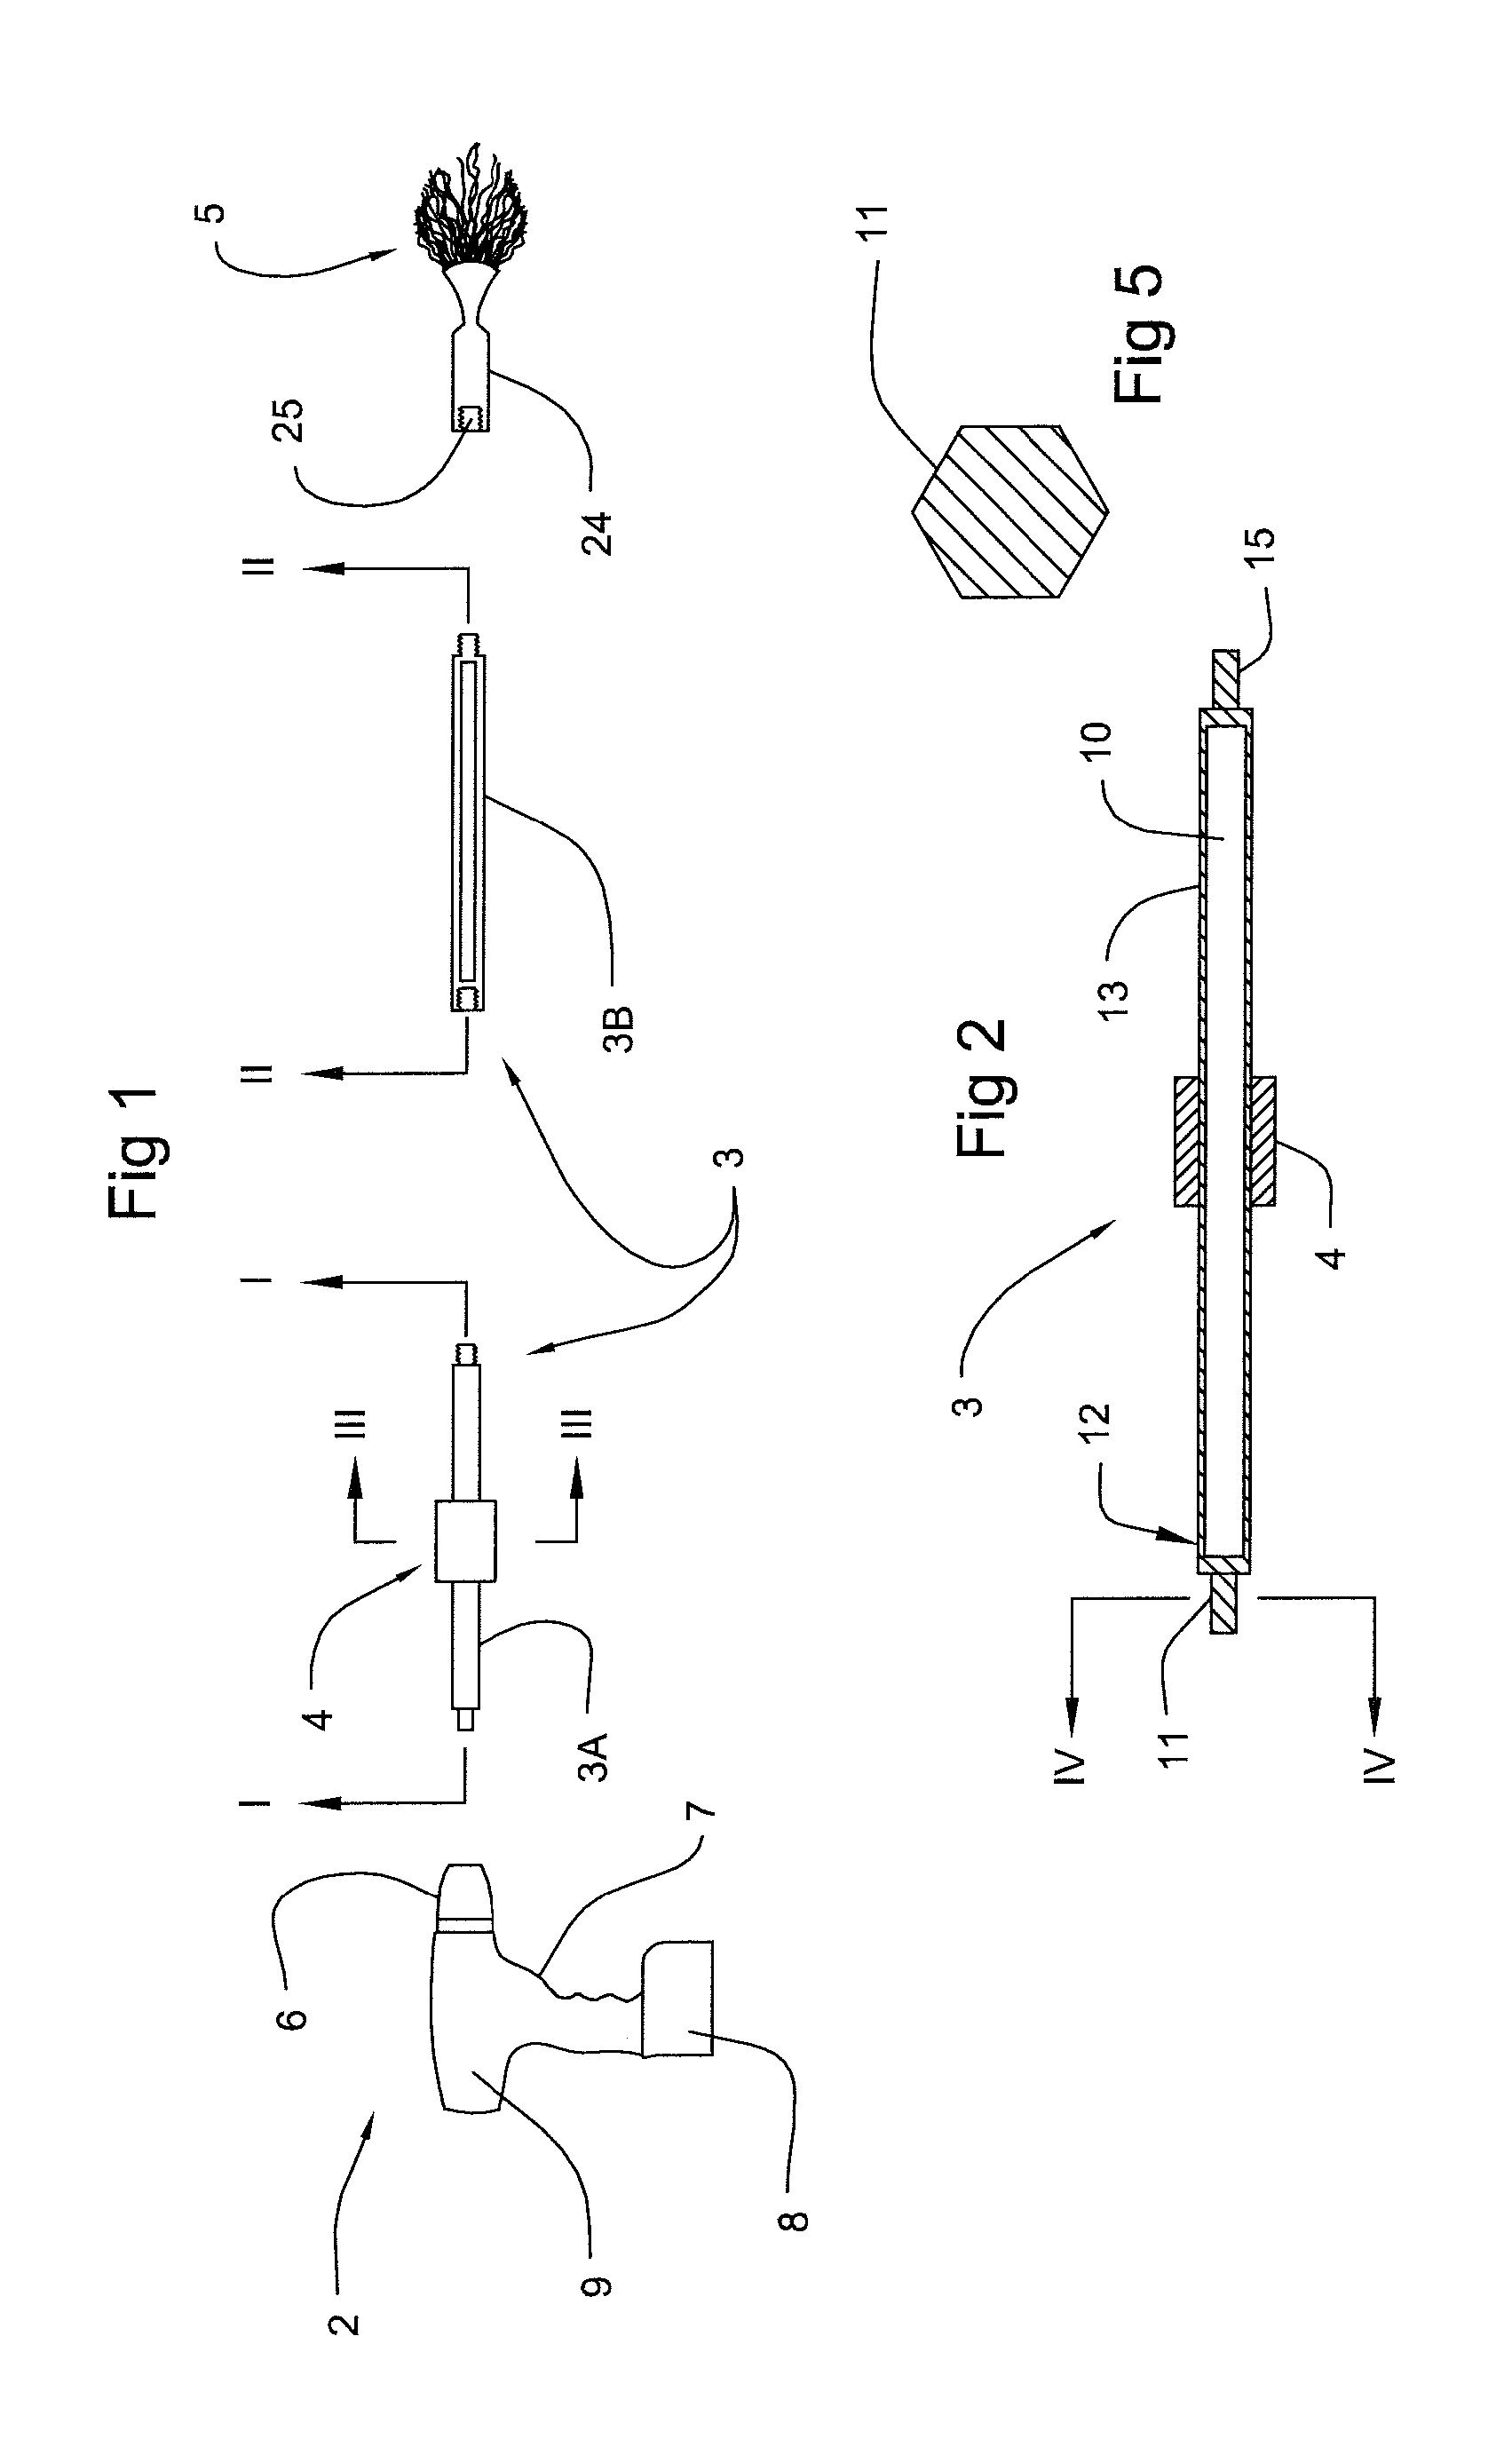 Power driven duster and cleaner apparatus